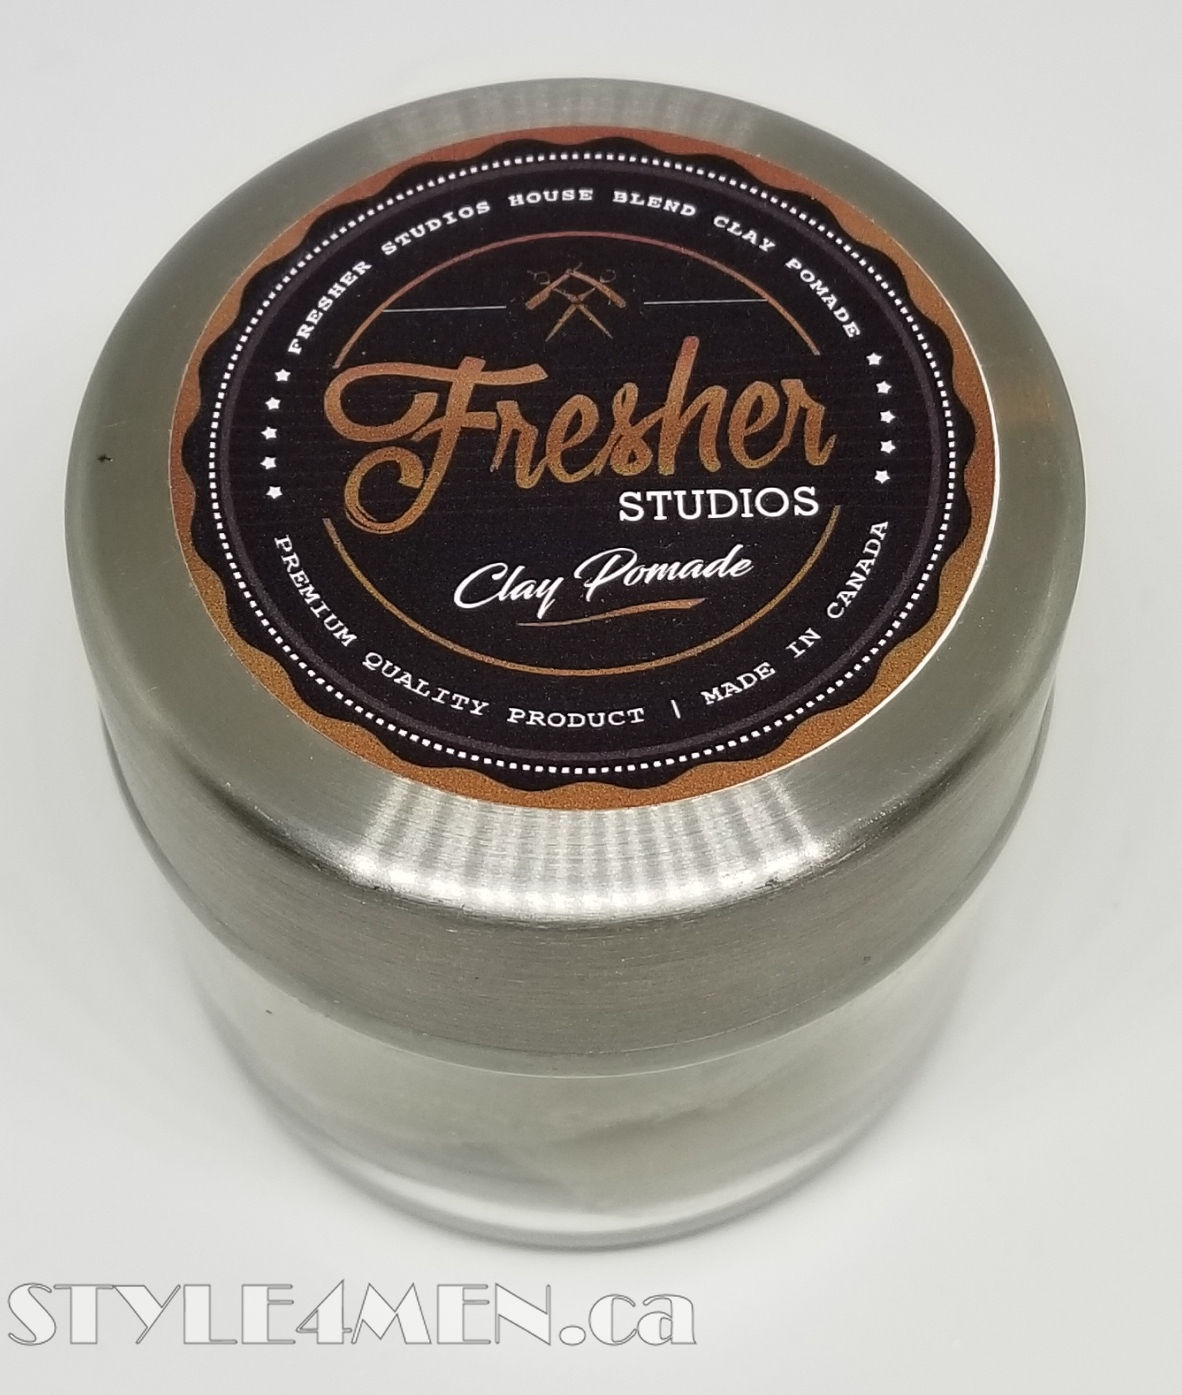 Fresher Studios Clay Pomade – A Smooth Clay Locally Produced in Ottawa